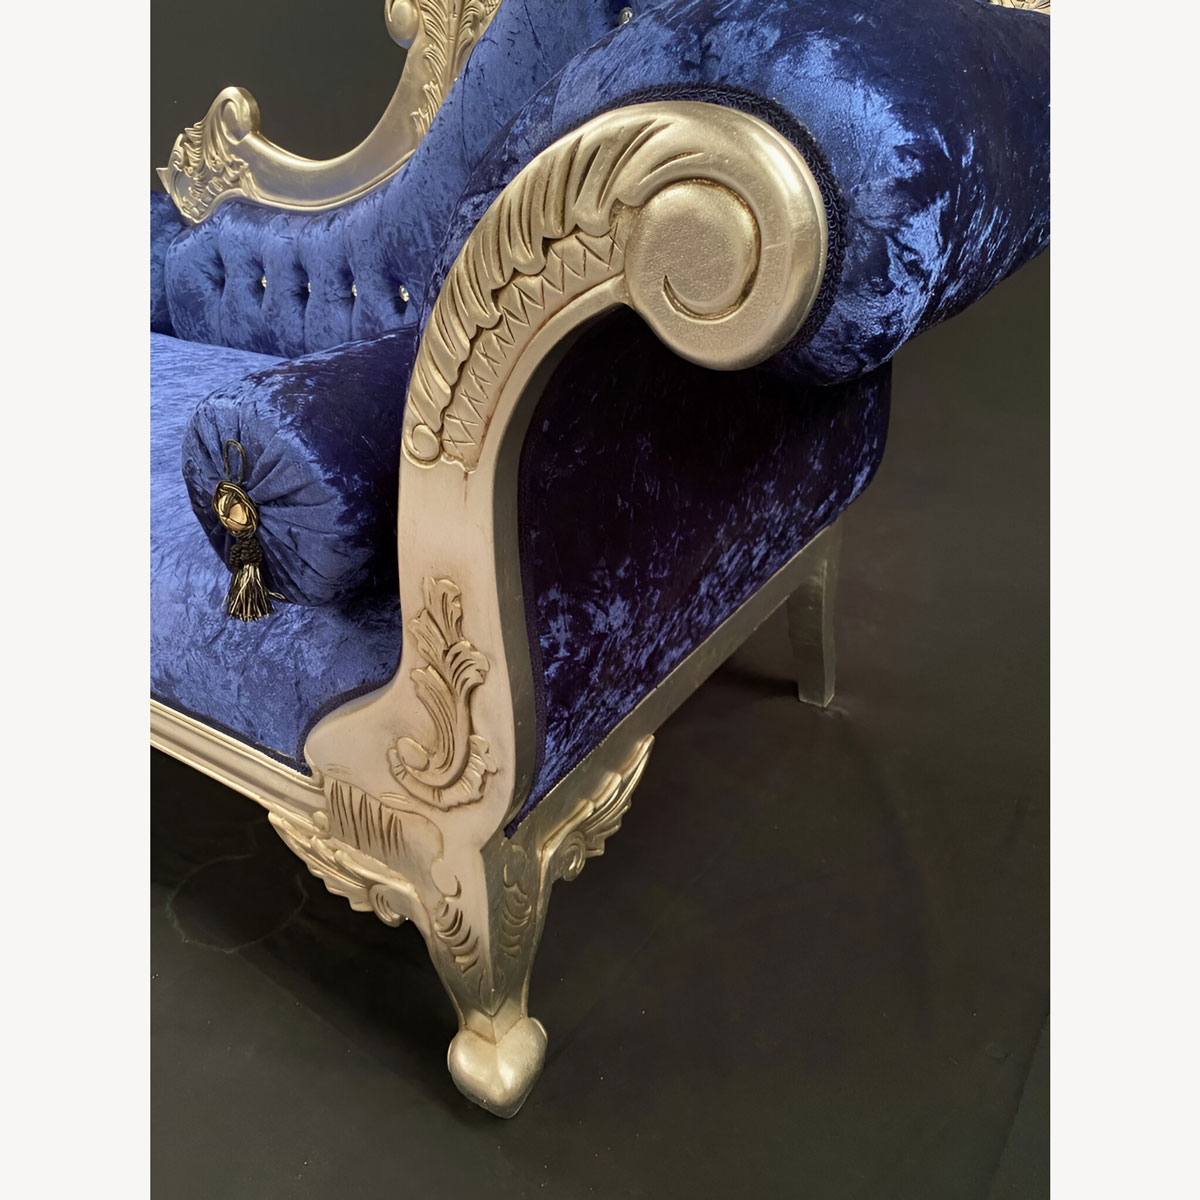 Chaise Hampshire Sofa In Silver Leaf Frame Upholstered In Blue Crushed Velvet With Crystal Buttoning 3 - Hampshire Barn Interiors - Chaise Hampshire Sofa In Silver Leaf Frame Upholstered In Blue Crushed Velvet With Crystal Buttoning -